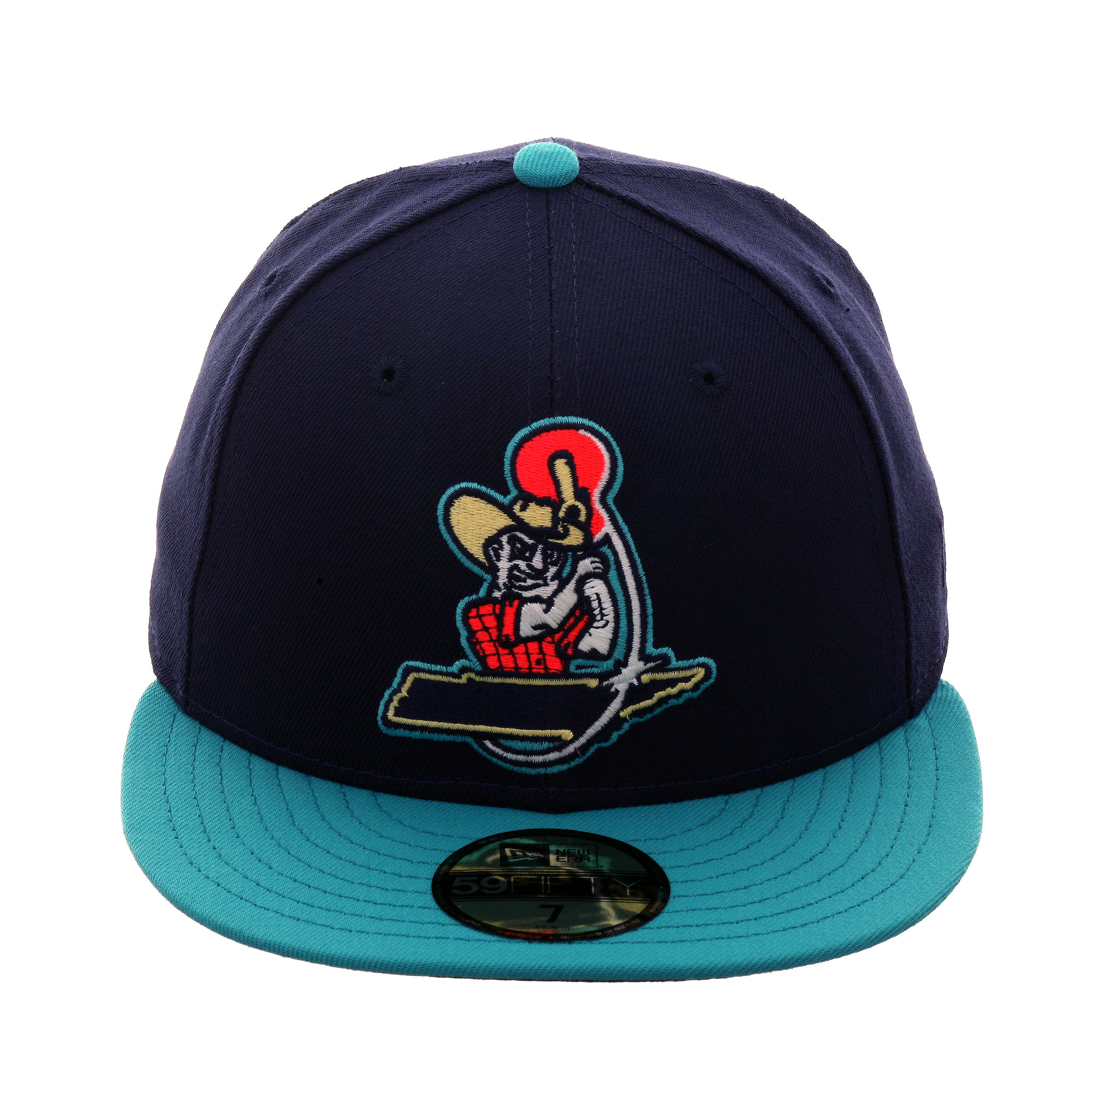 Hat Club - Minor League Hockey 5950s going online Tuesday